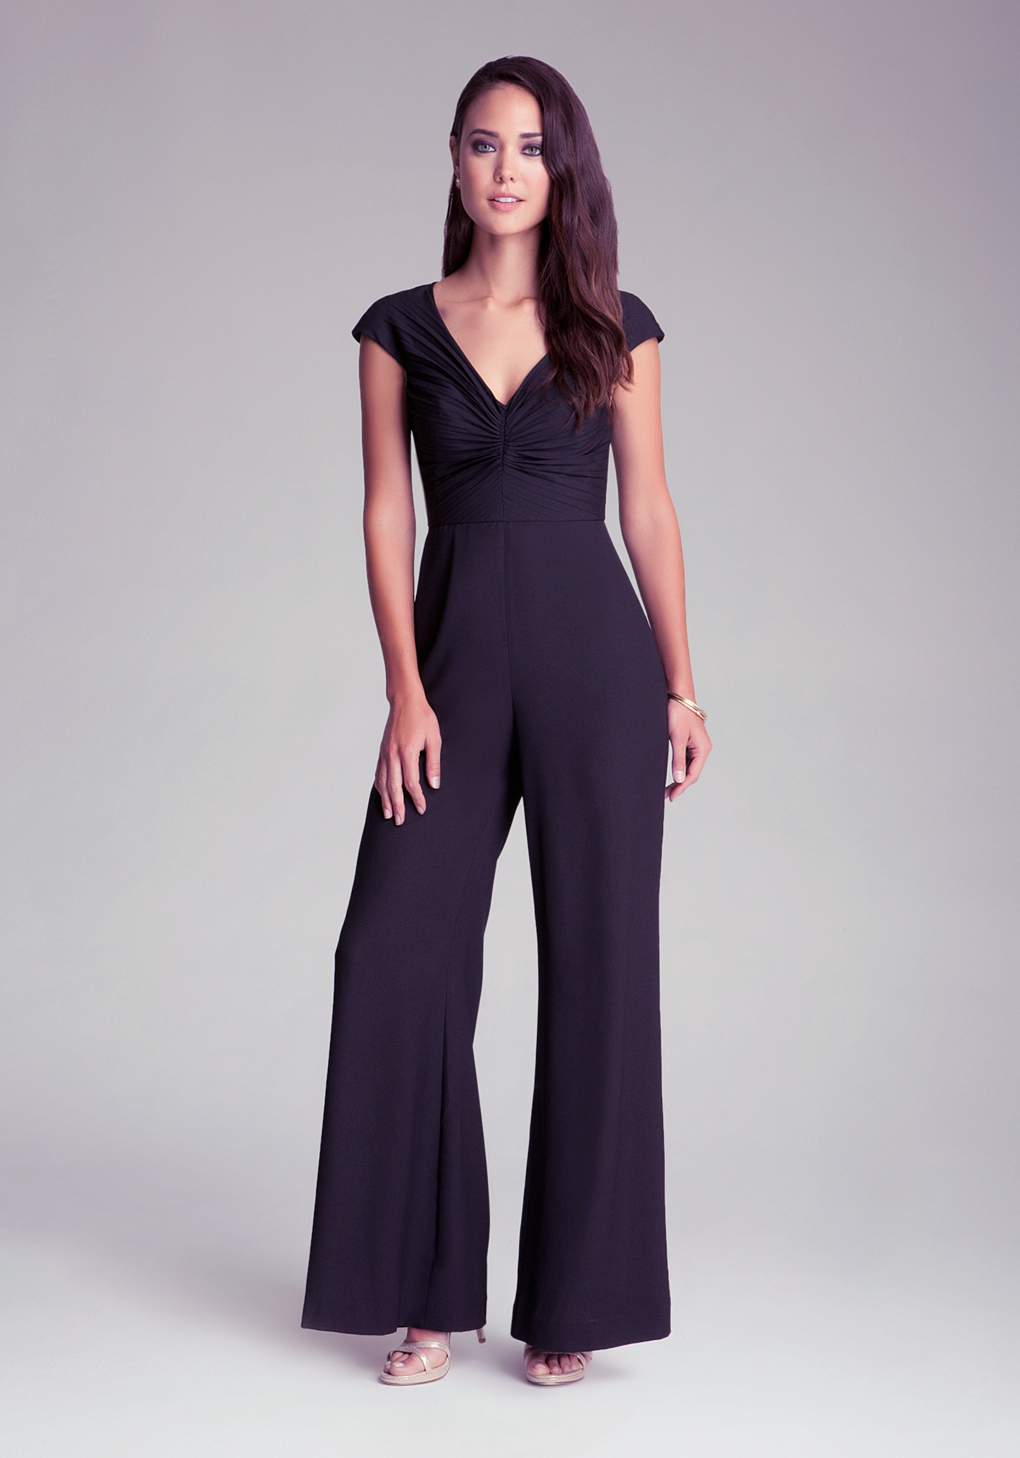 Lyst - Bebe Petite Pleated Front Jumpsuit in Black